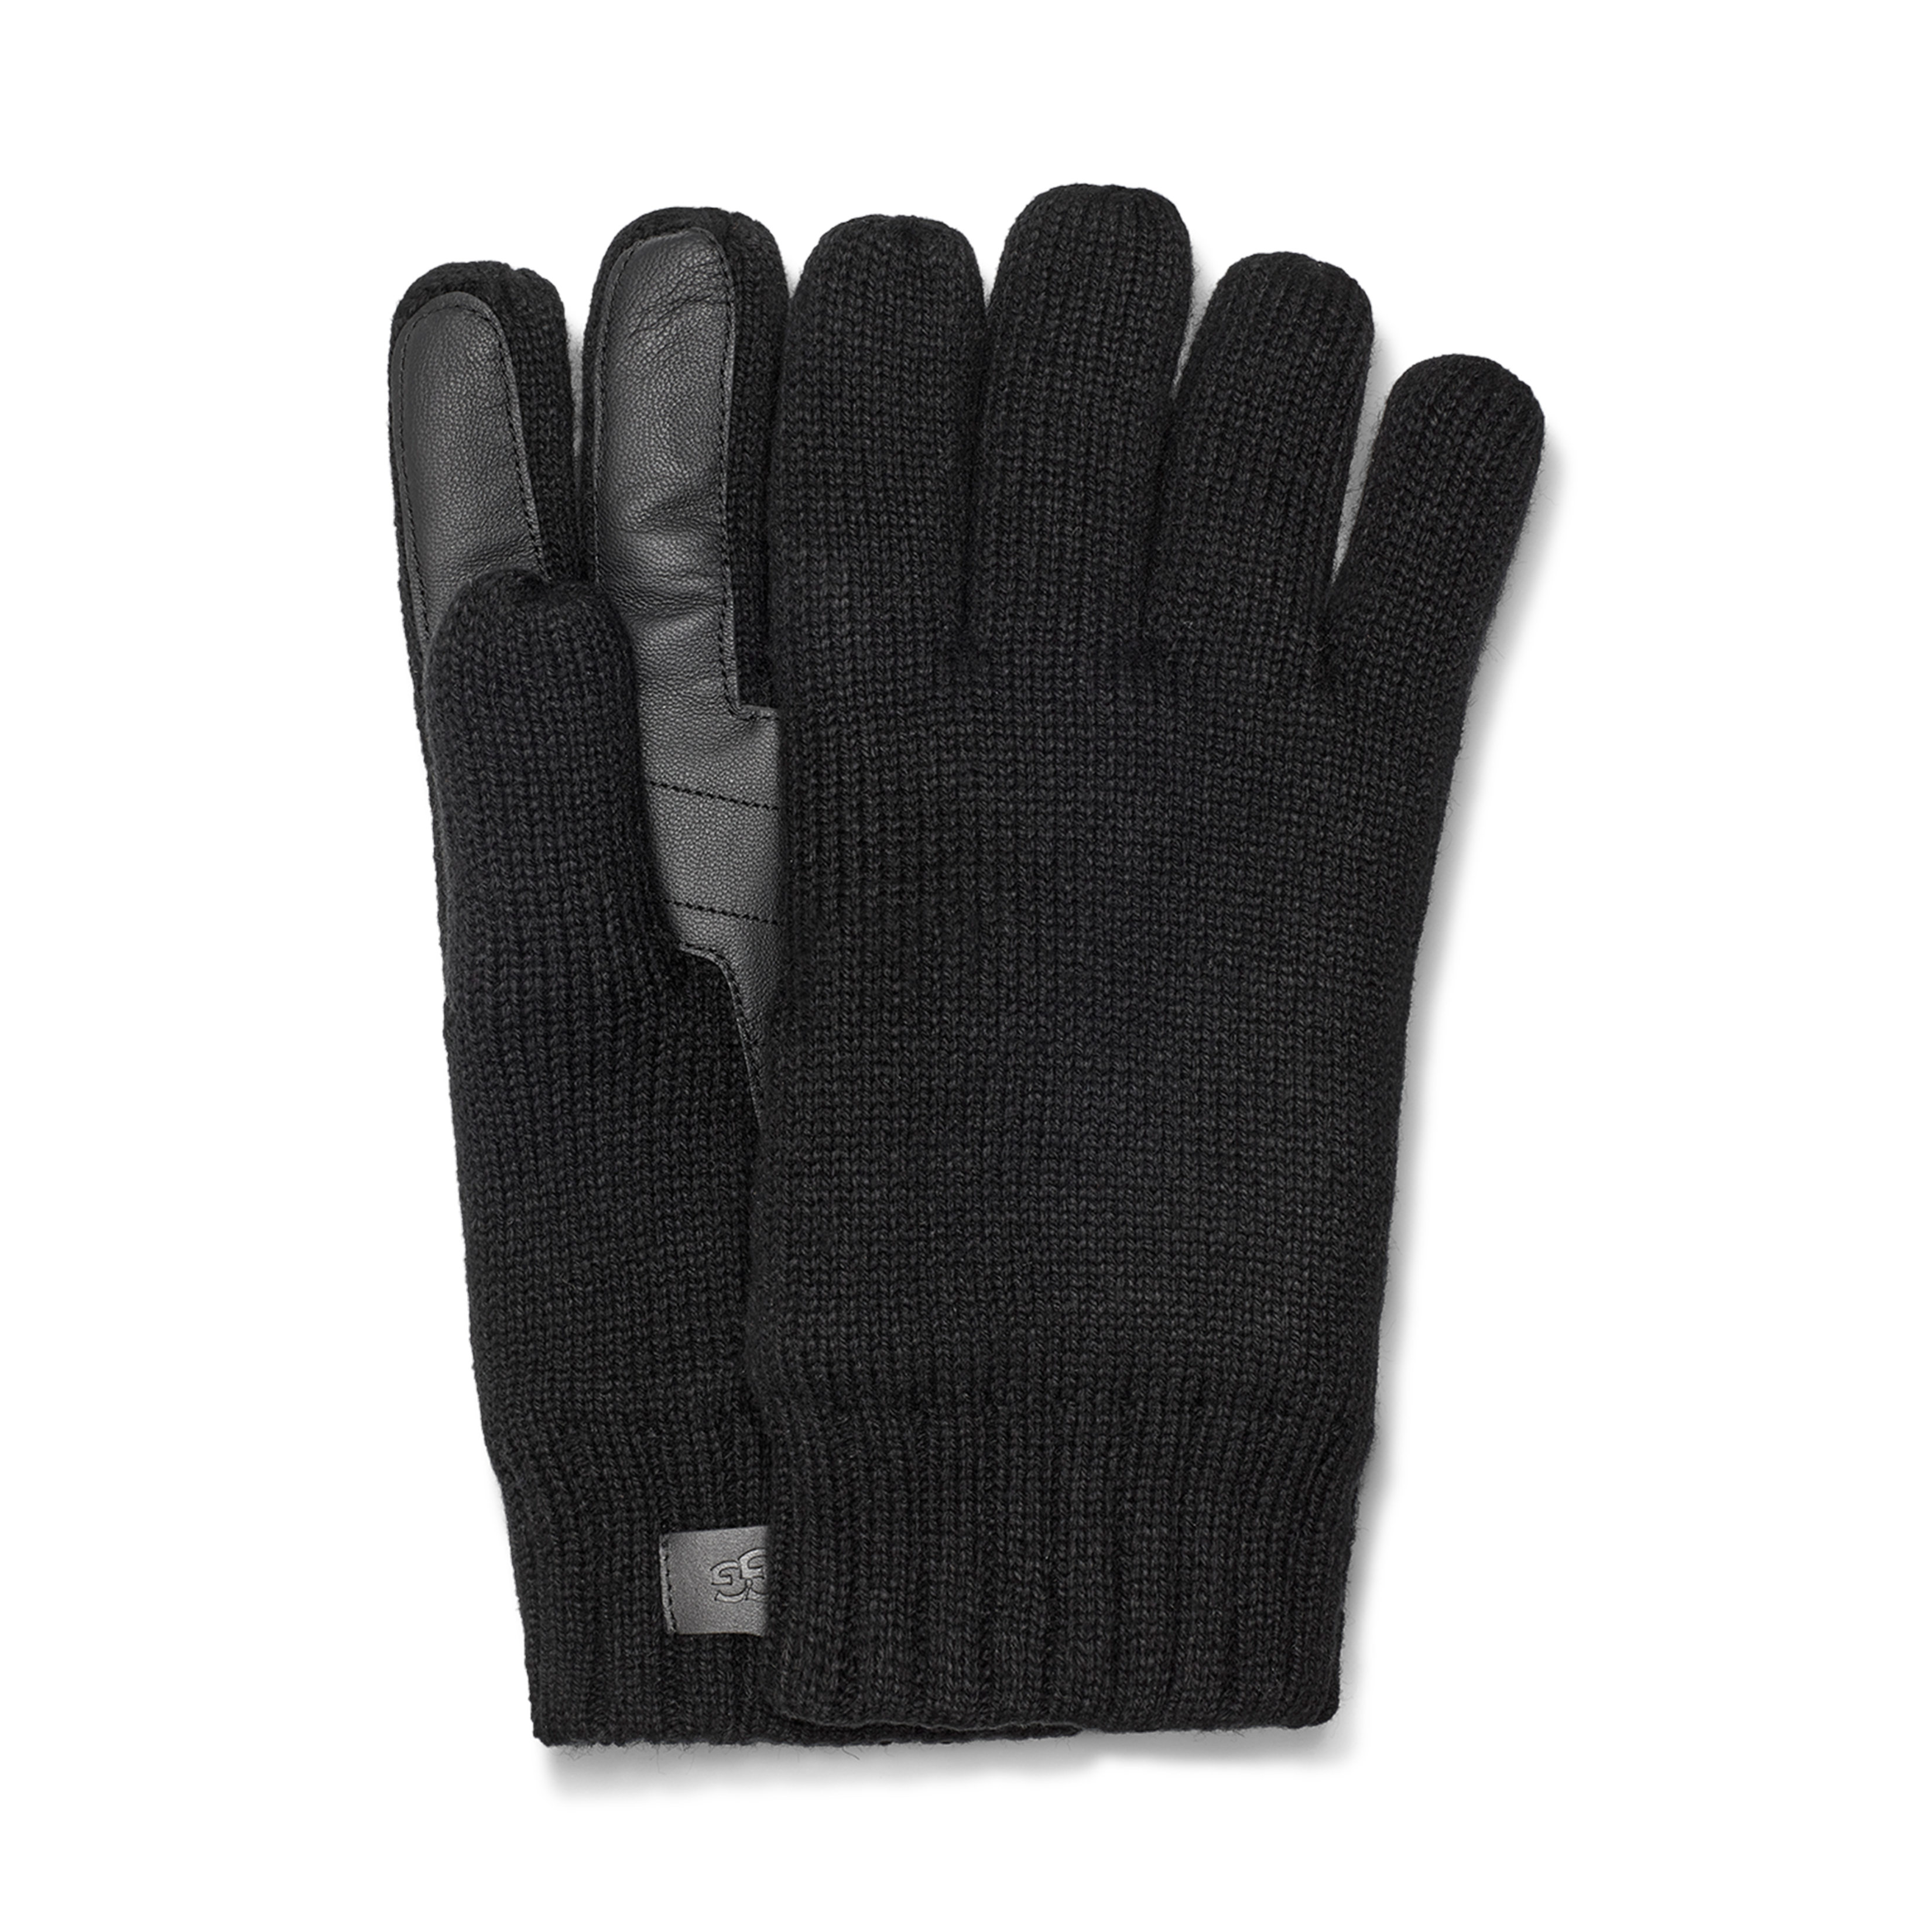 Men's Knit Glove With Palm Patch